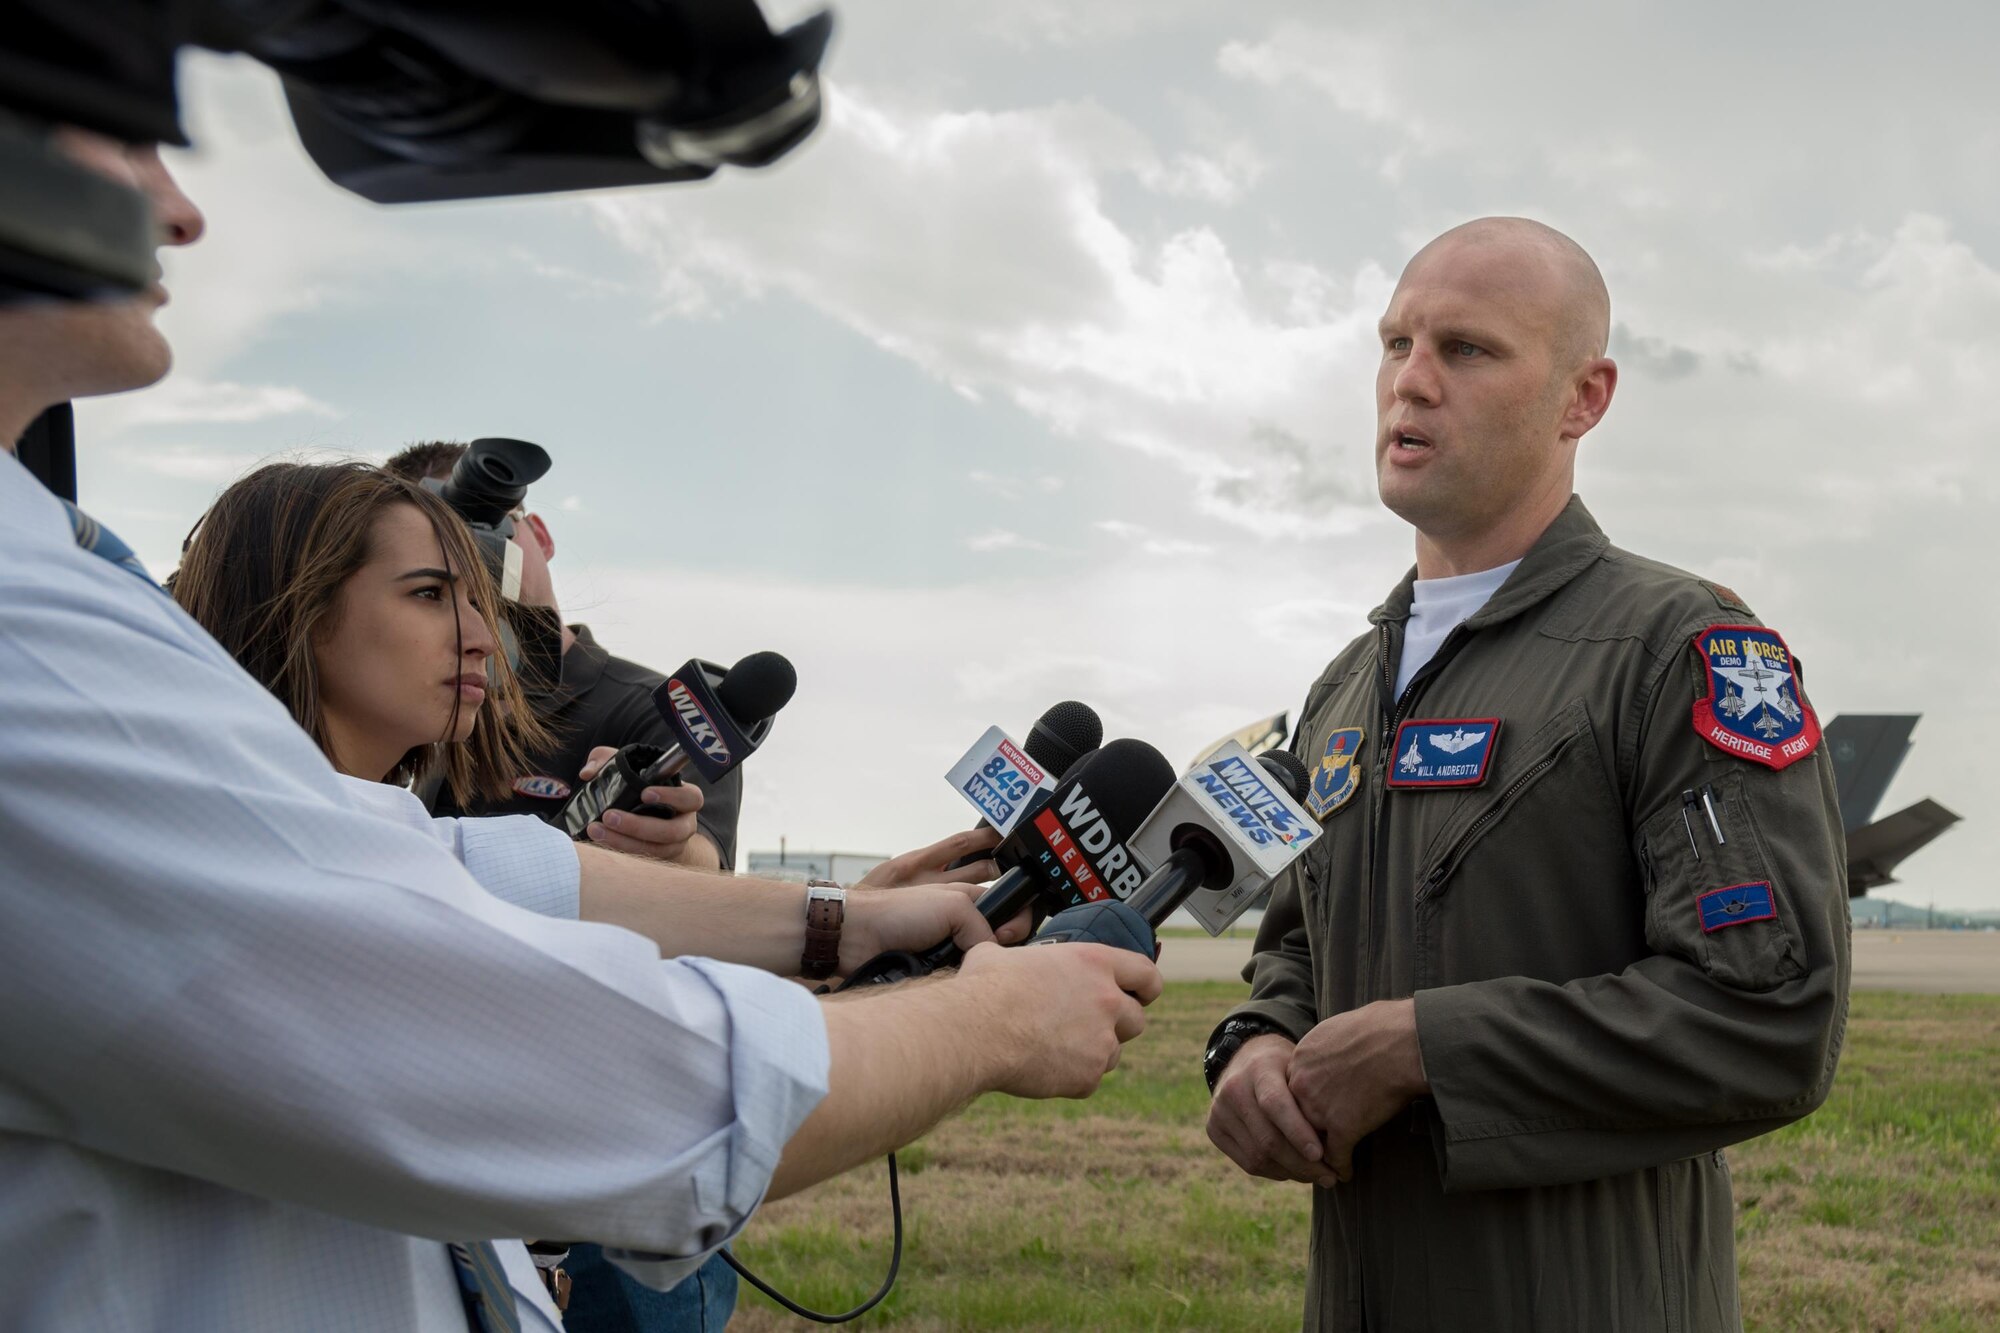 Maj. Will Andreotta, an F-35 Lighnining II pilot from the 61st Fighter Squadron at Luke Air Force Base, Ariz., talks with news media at the Kentucky Air National Guard Base in Louisville, Ky., April 20, 2017. Andreotta is in town to perform in the Thunder Over Louisville air show on April 22. (U.S. Air National Guard photo by Lt. Col. Dale Greer)